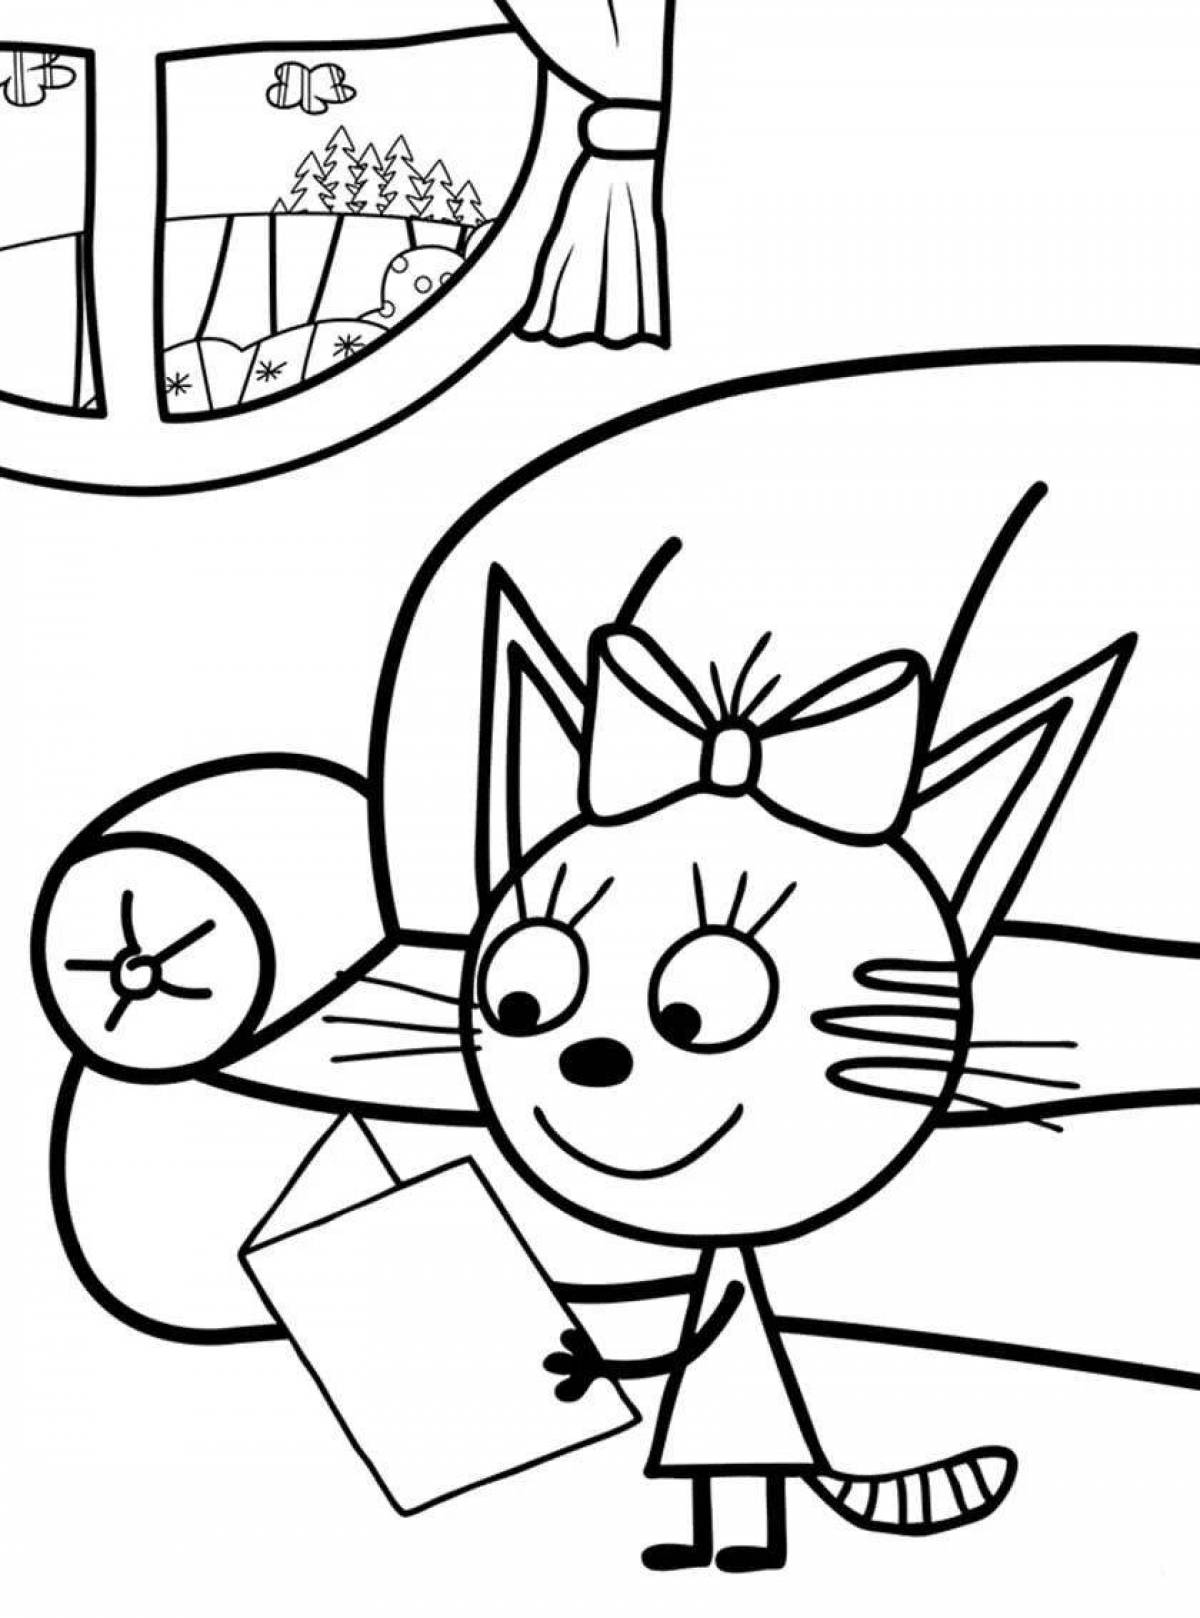 Amazing 3 cats coloring pages for kids